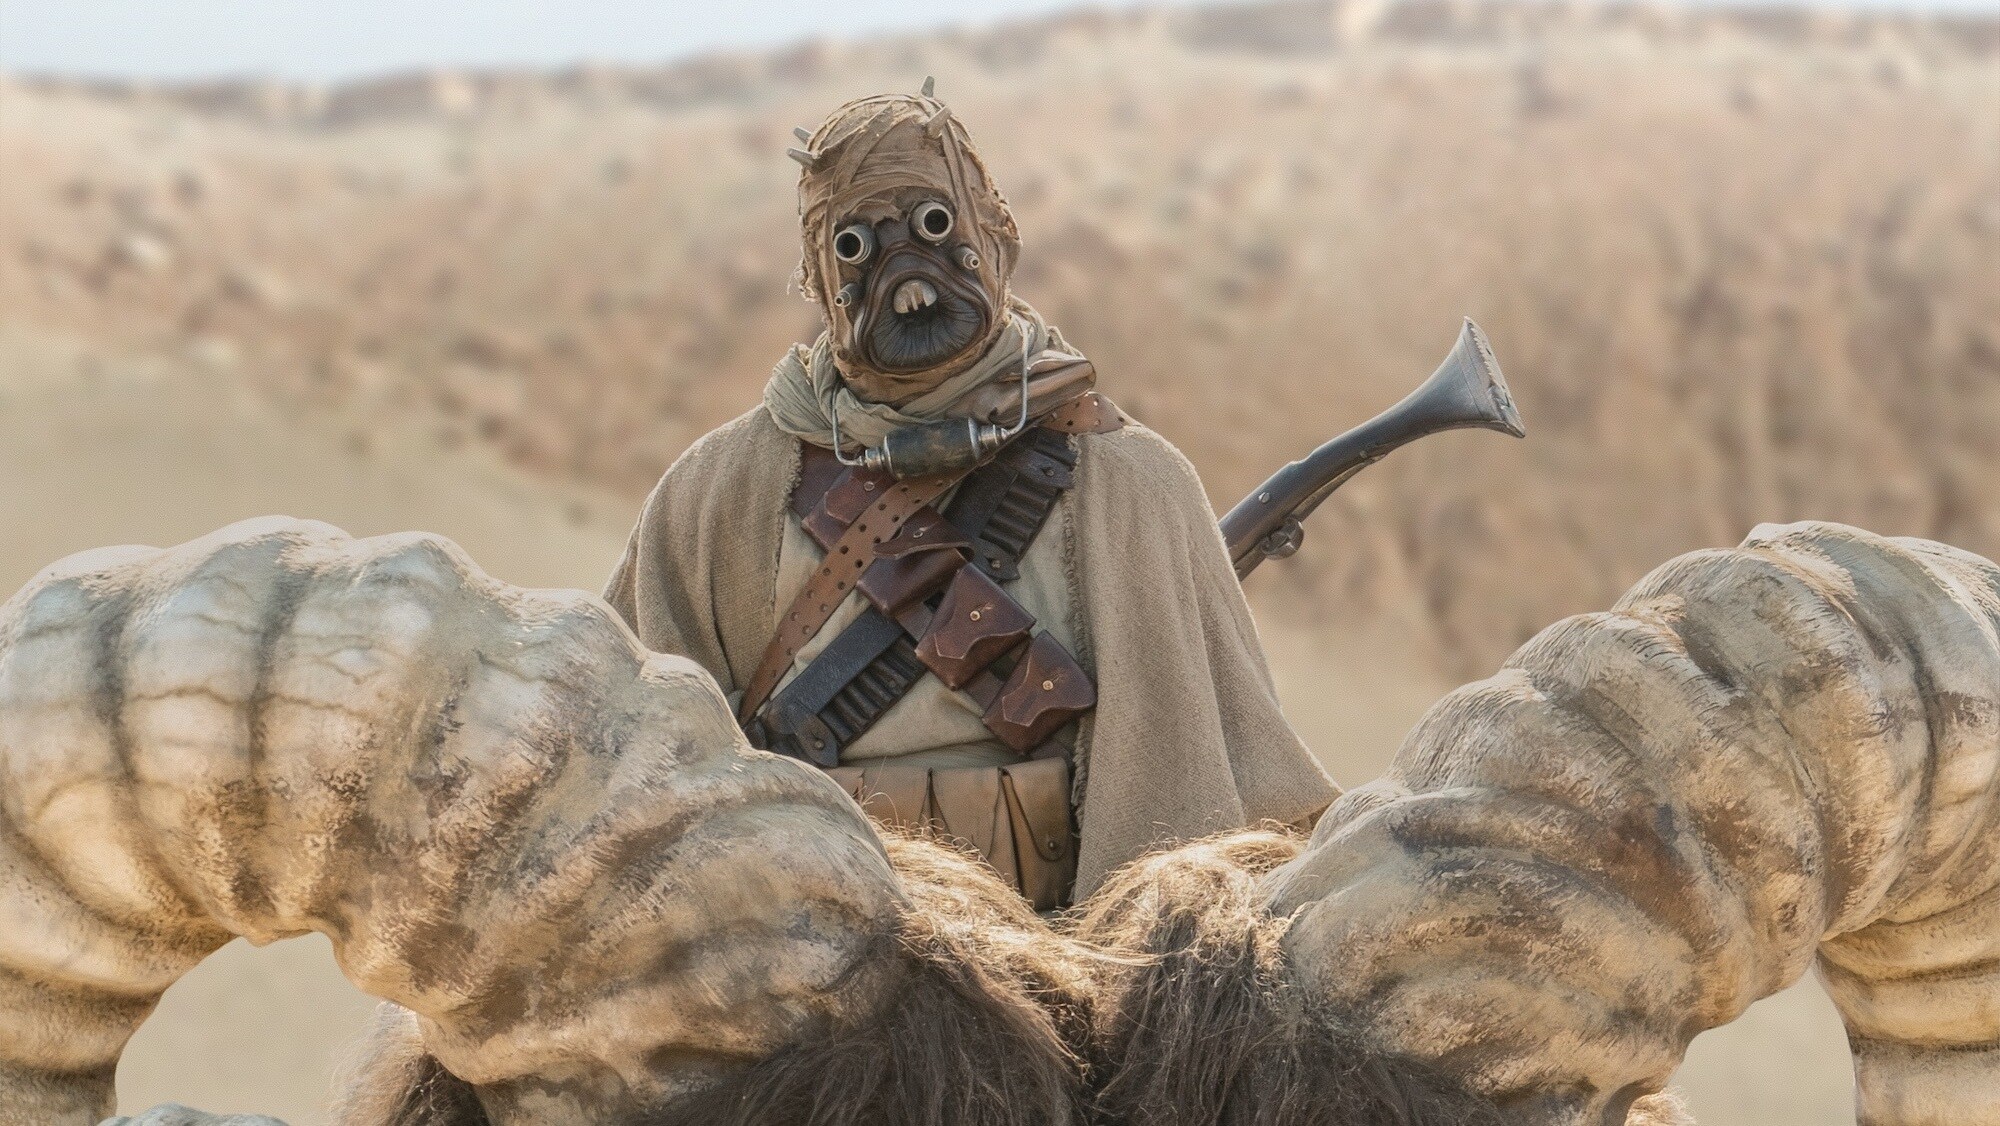  Tusken Raider and bantha in THE MANDALORIAN, season two, exclusively on Disney+